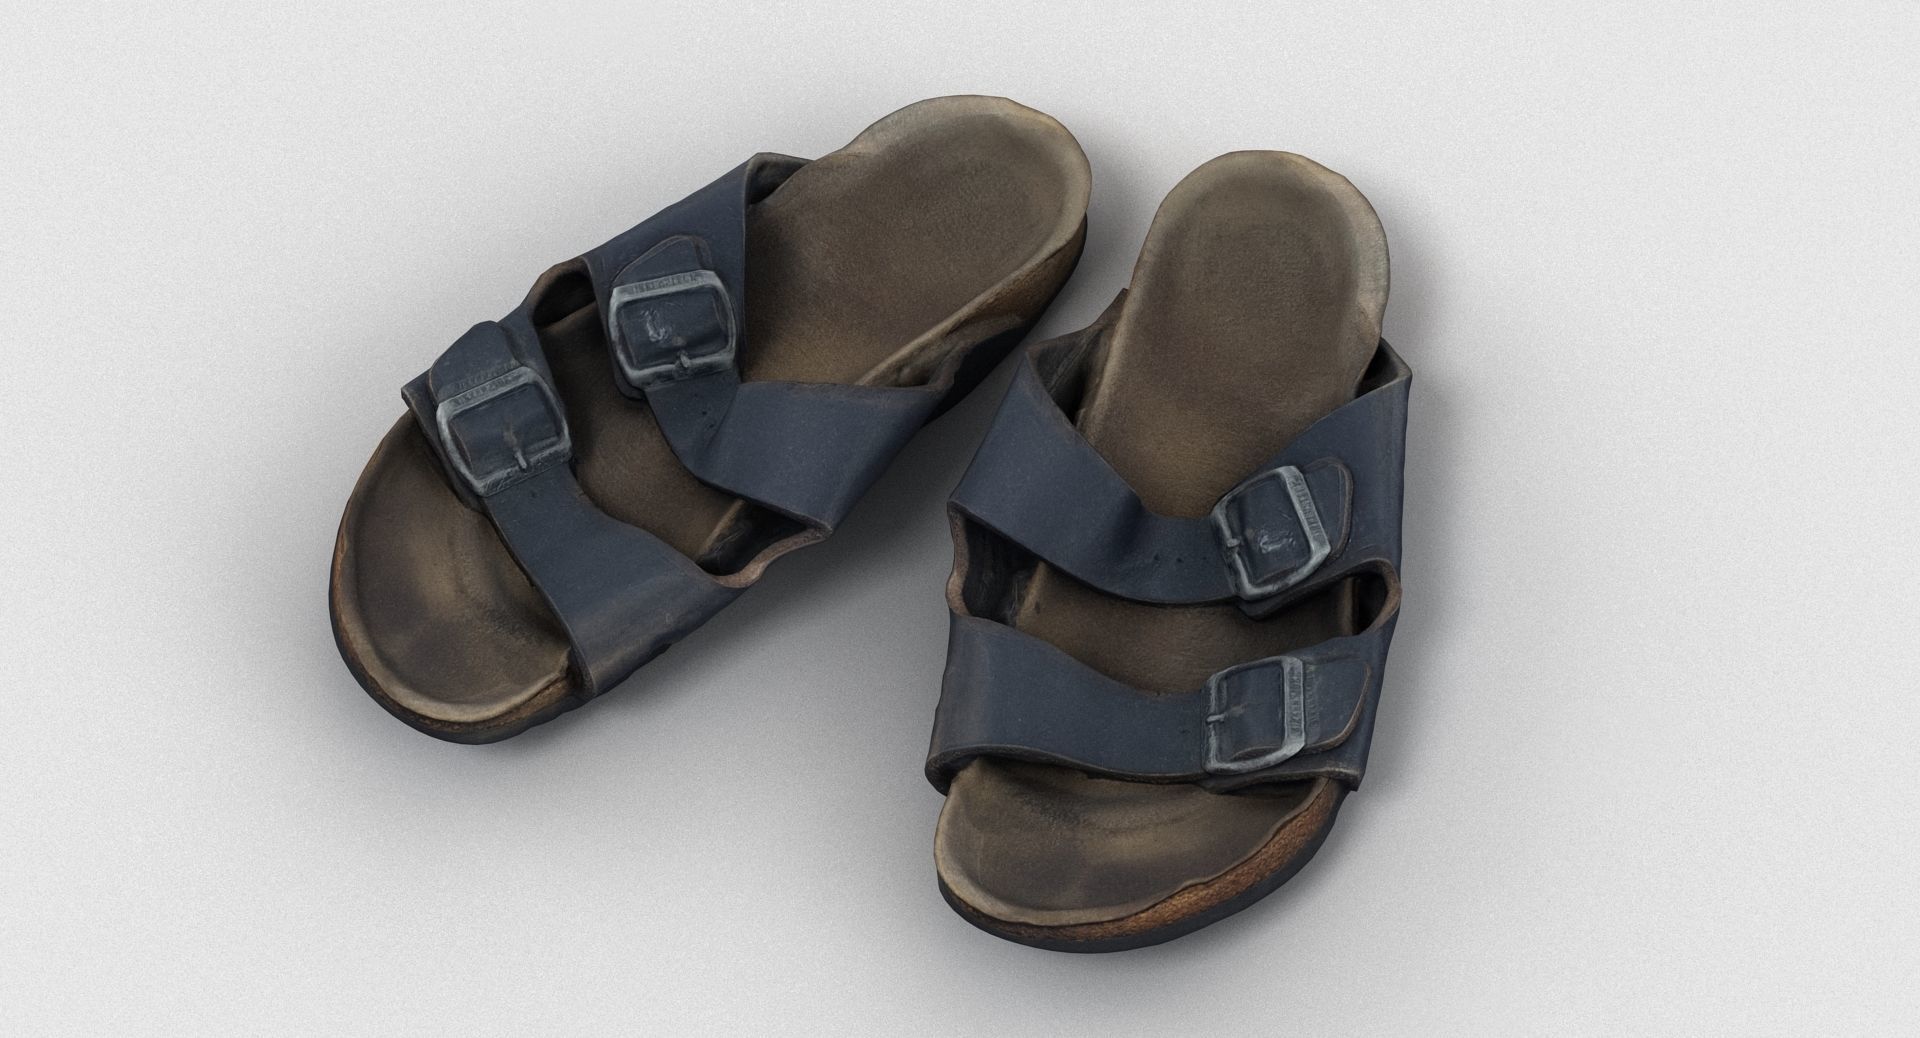 Annoying Toe And Foot Marks On Sandals? We’ve Got The Solution!